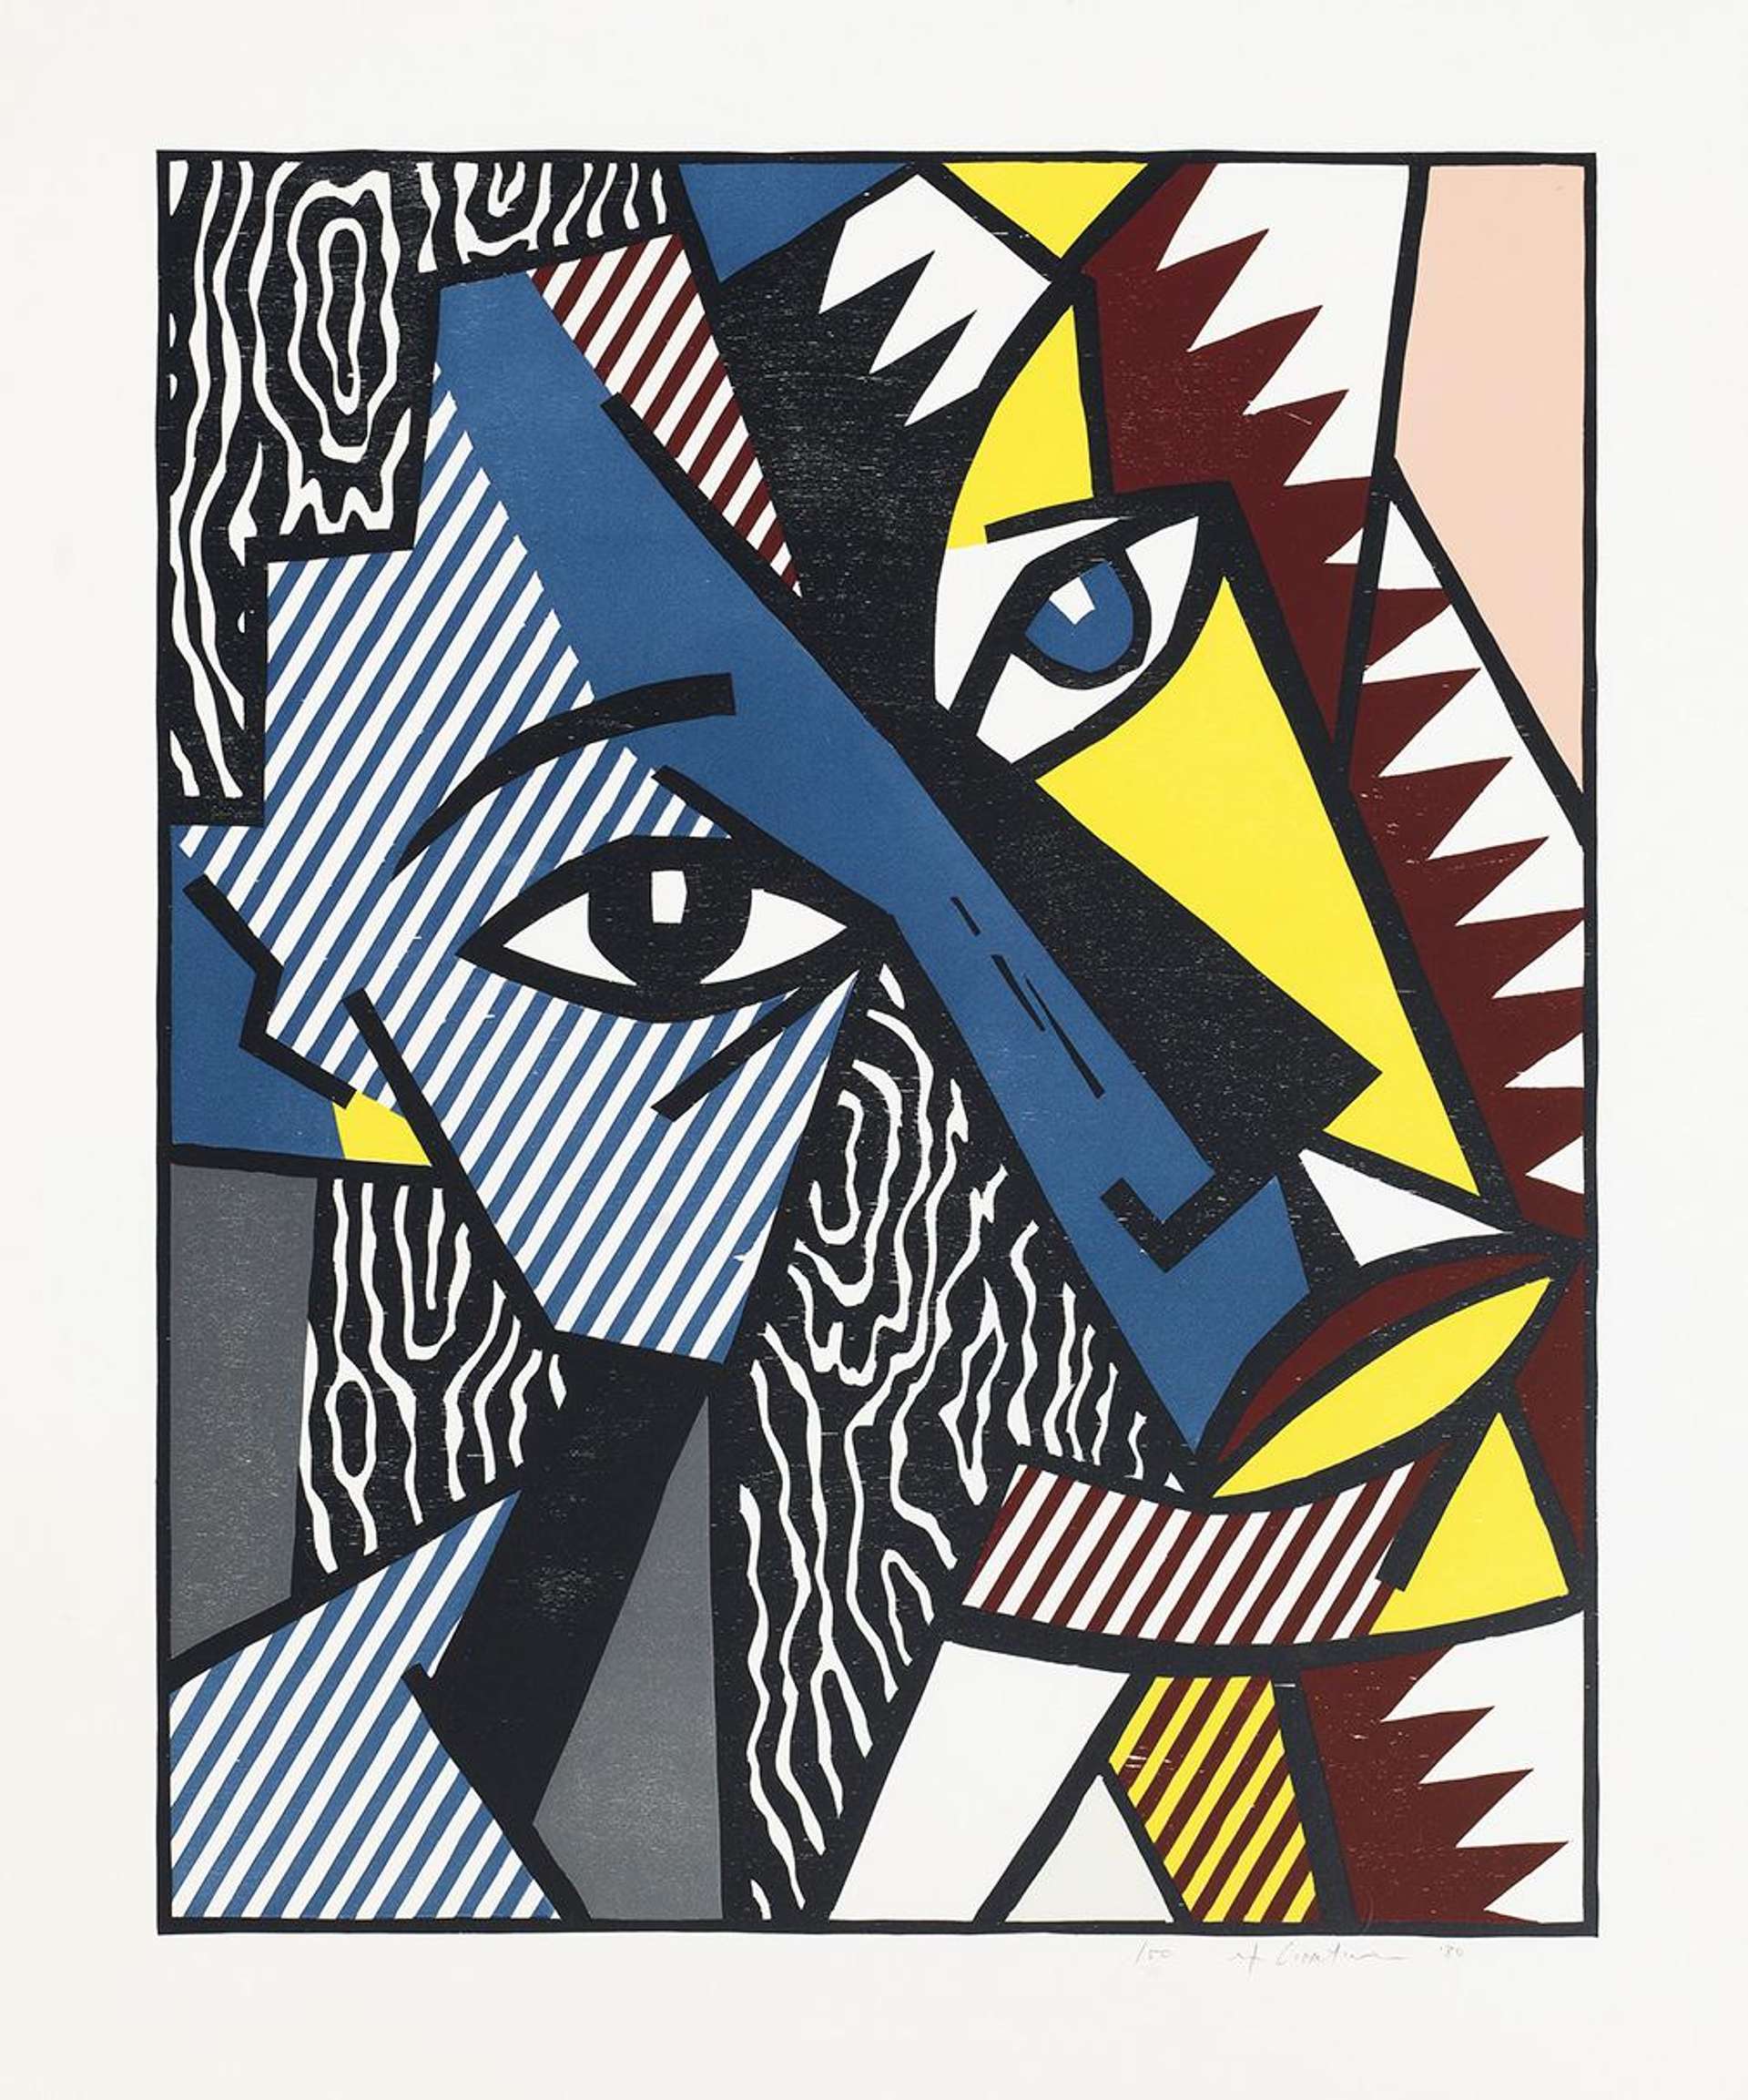 Head shows a sharply carved imprint of a face with its gaze turned upwards. Every element in the print is a different shape, adorned by various hues and patterns. The juxtaposition of the distinctly coloured forms, bold contours, smooth striped surfaces, simulated wood grains and the rough jagged lines.